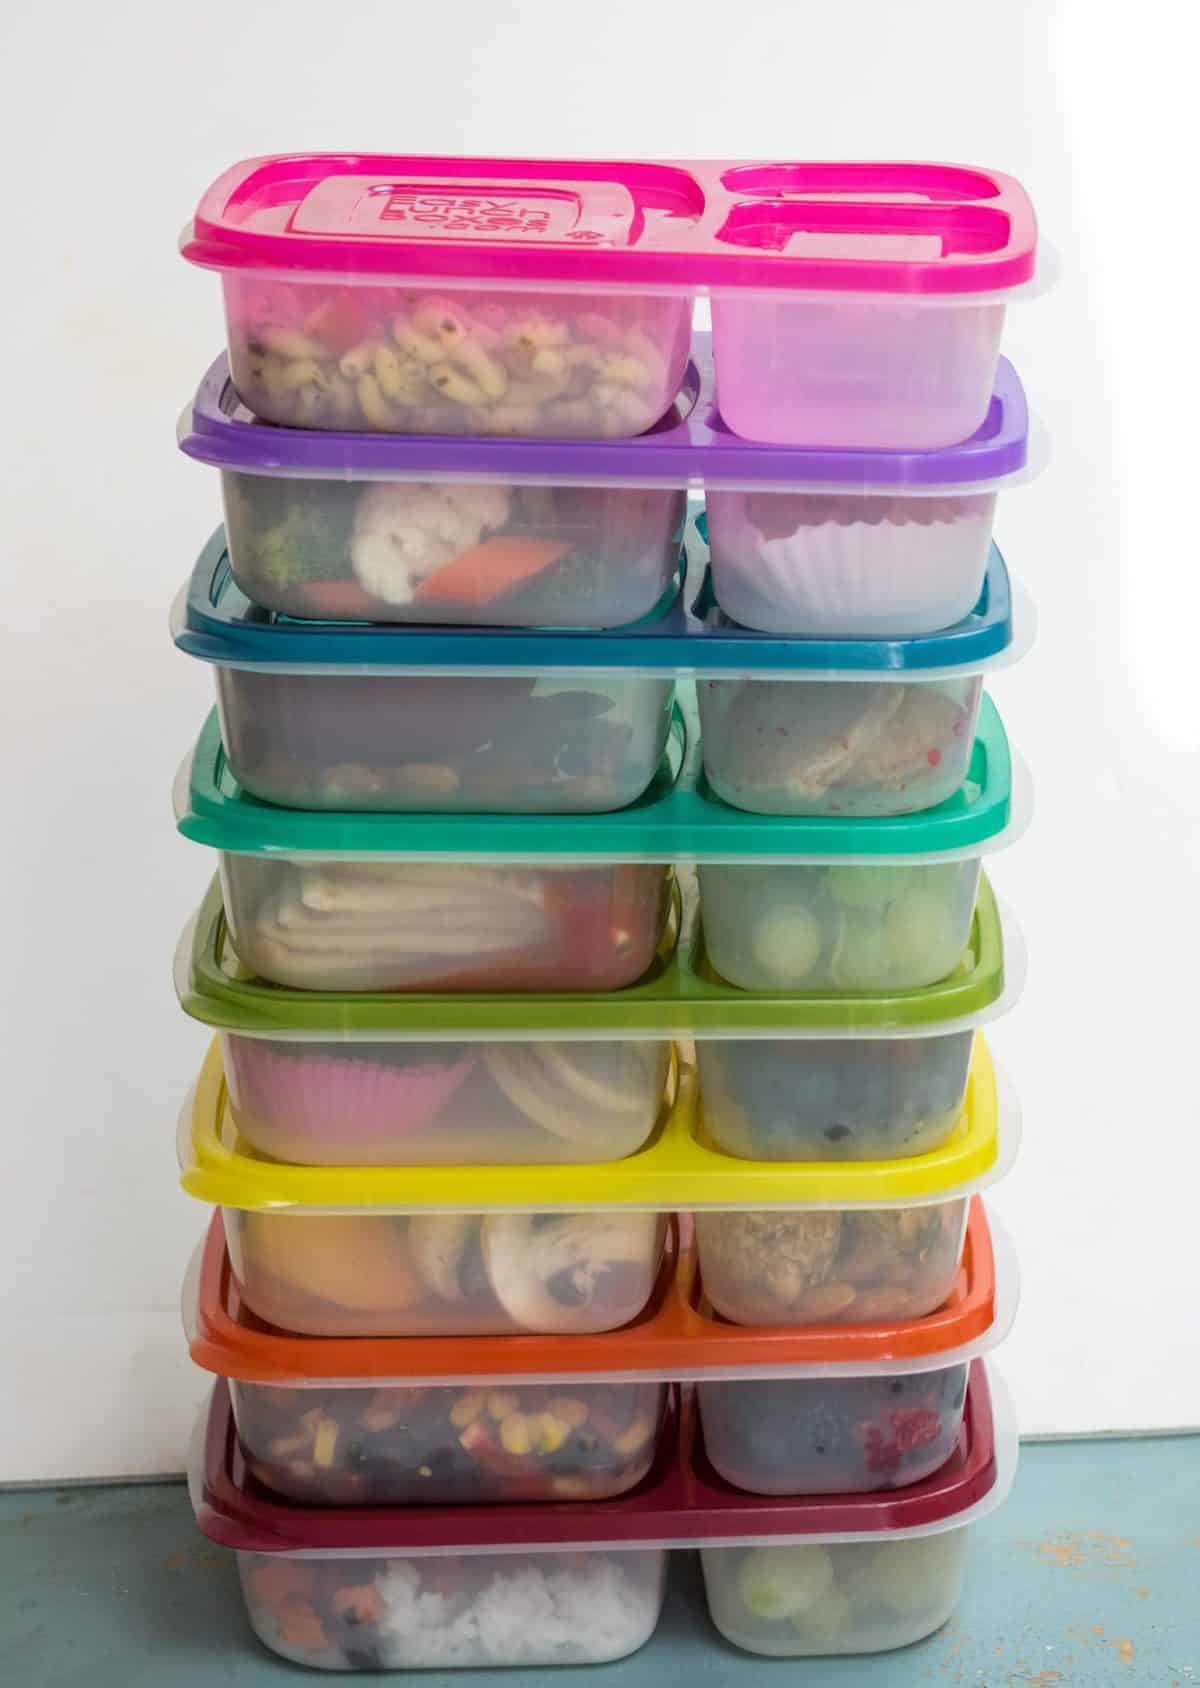 12 Healthy Lunch Box Ideas for Kids or Adults that are simple